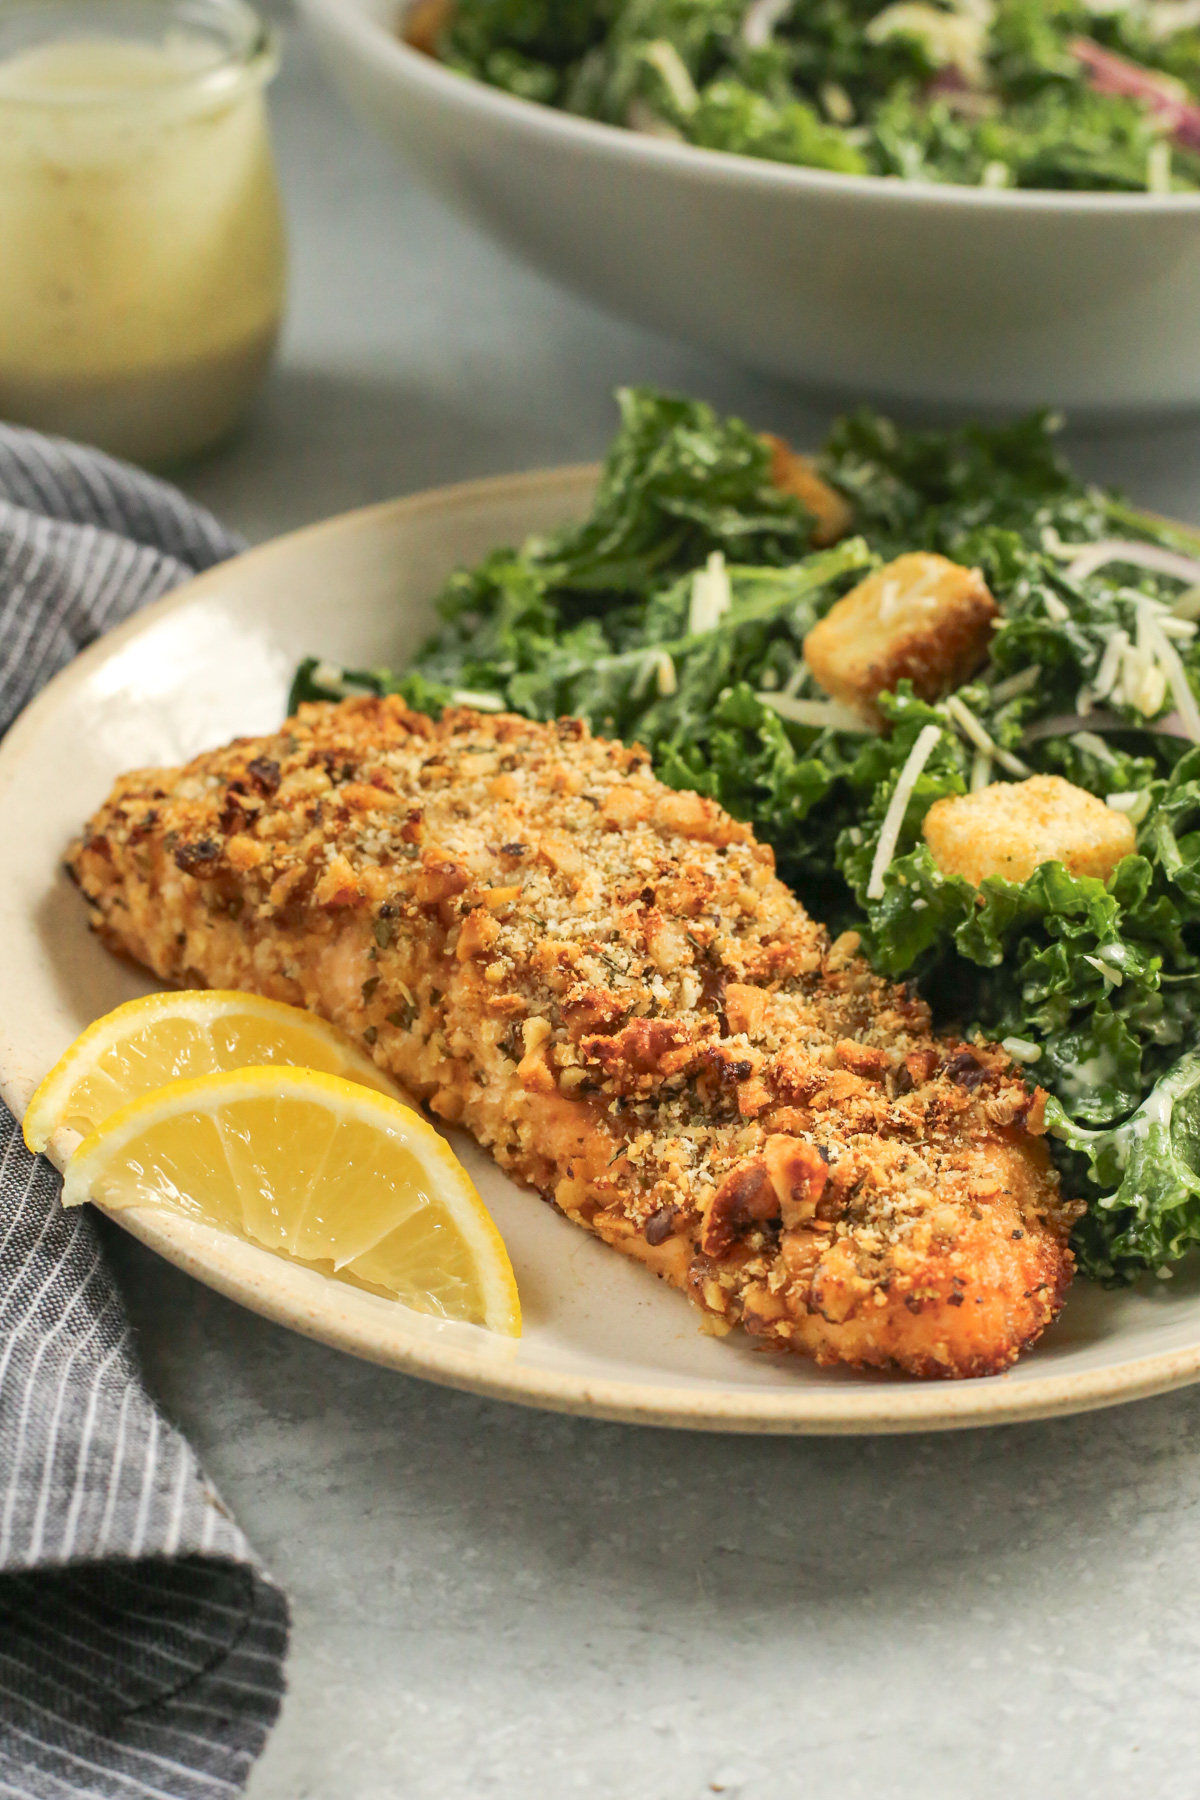 A serving of walnut crusted salmon on a ceramic plate, served with a kale caesar salad and croutons plus two small lemon wedges, with a serving bowl of salad in the background